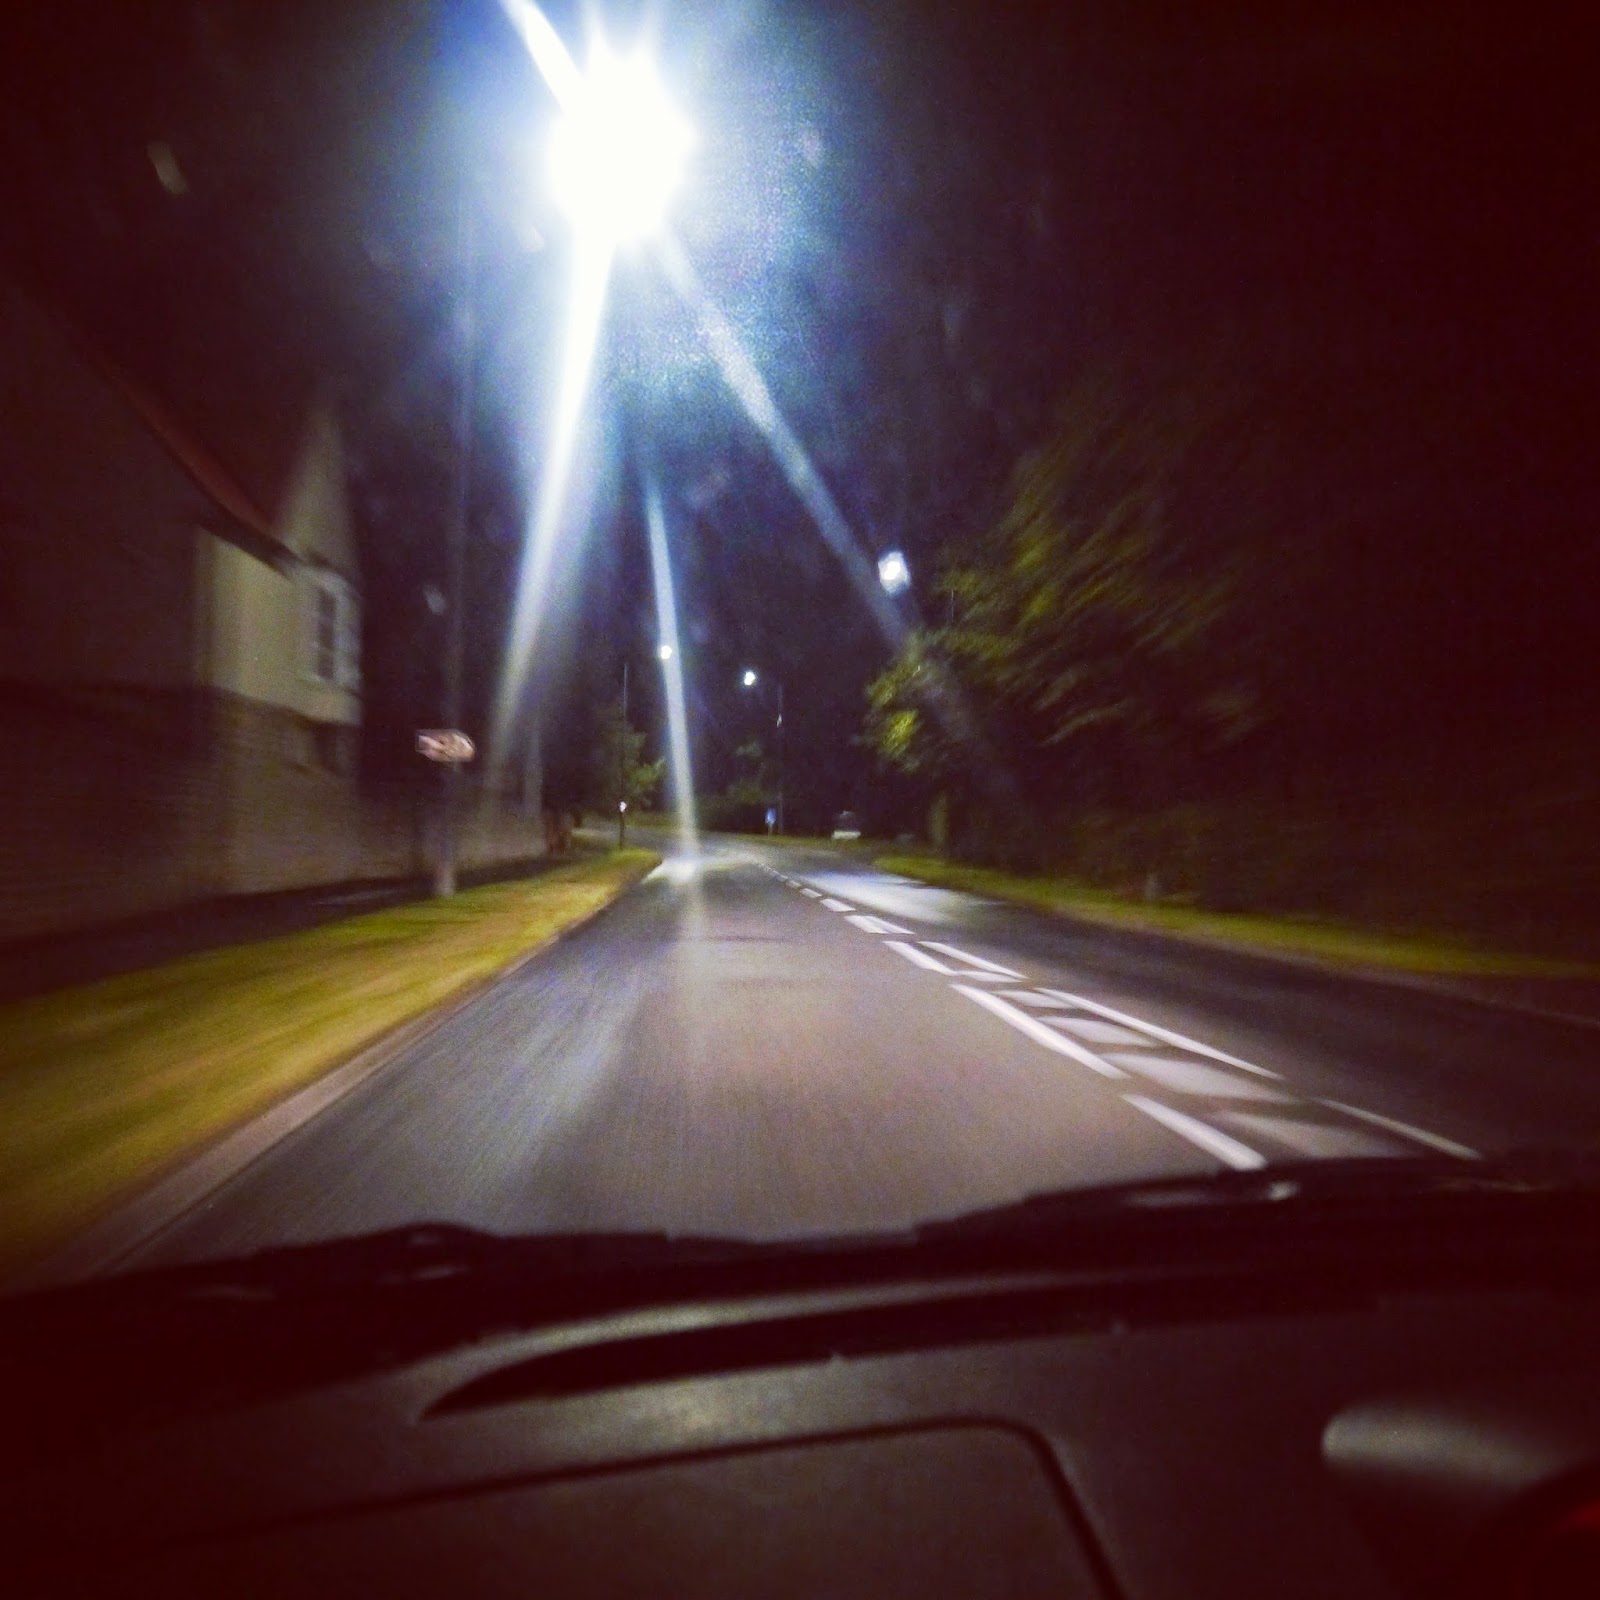 Driving home